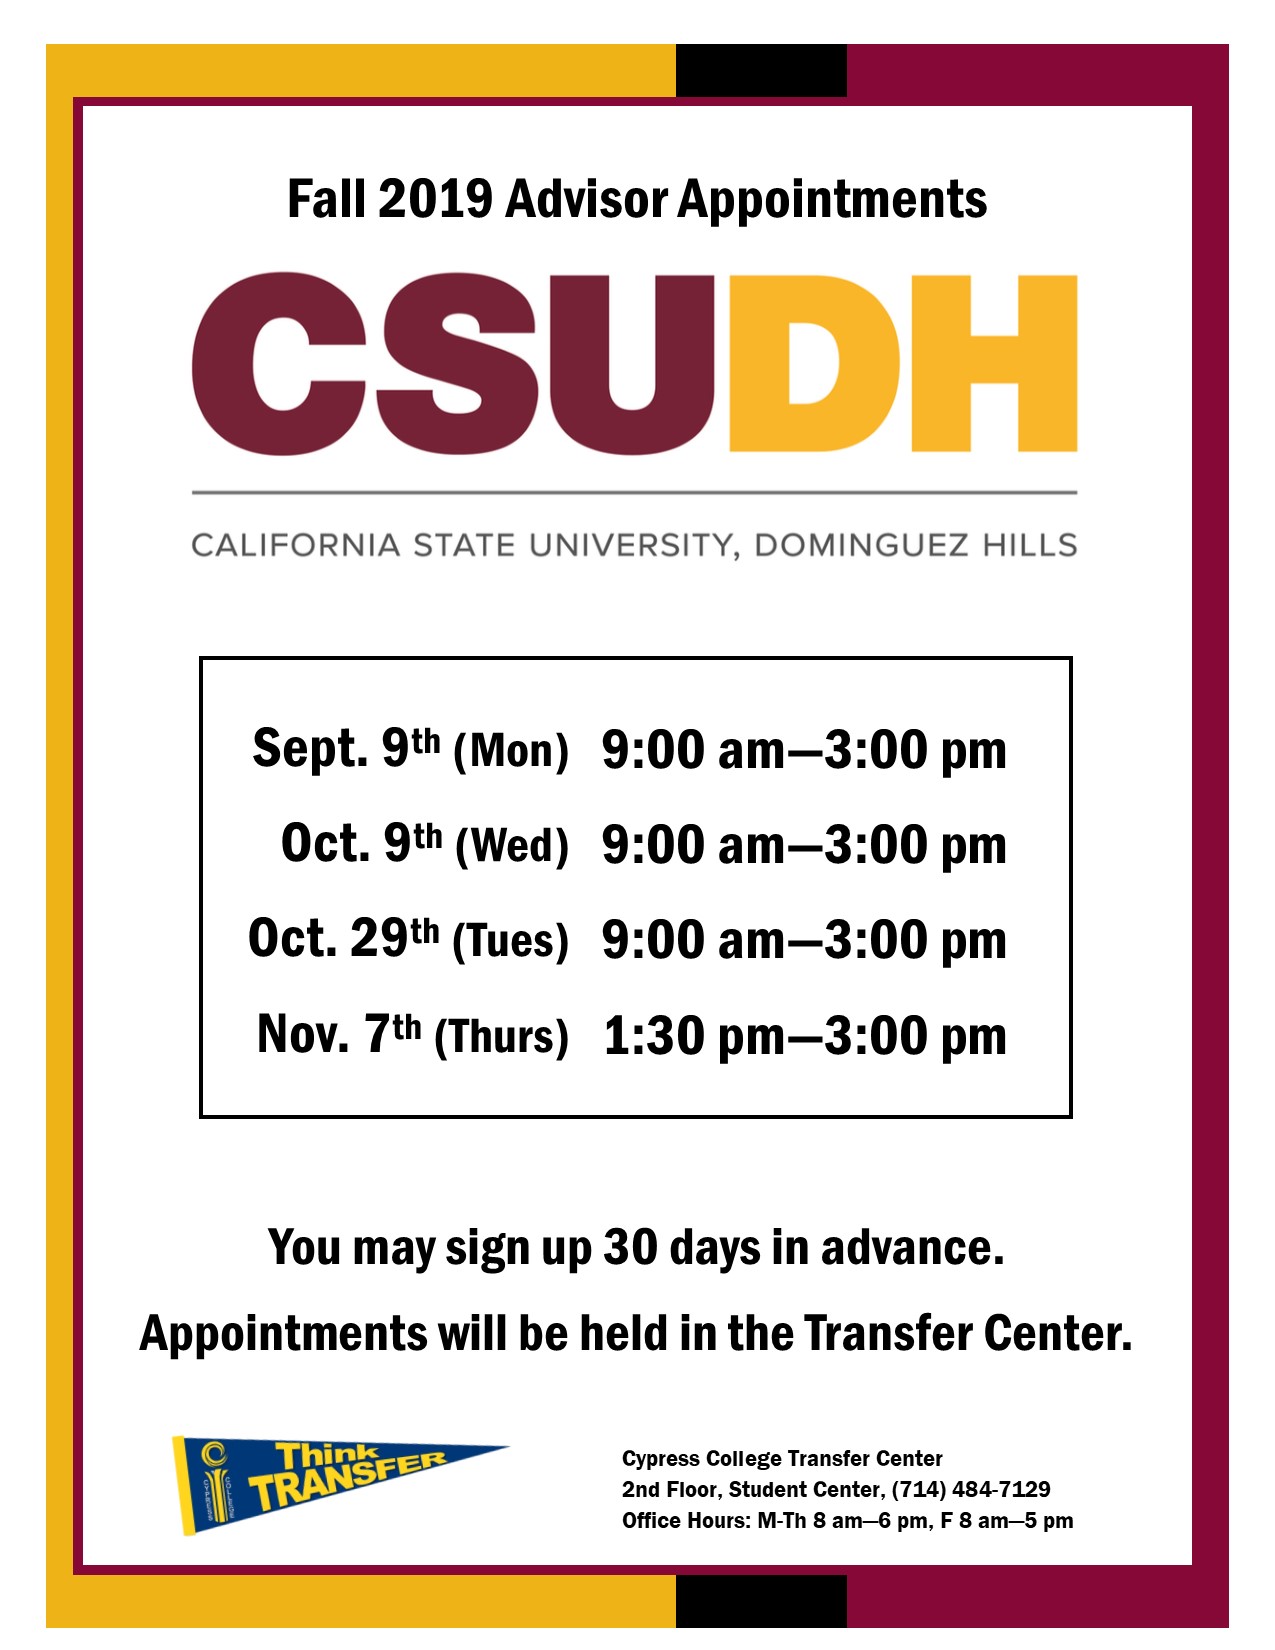 2019 CSUDH advisor appointments dates and times